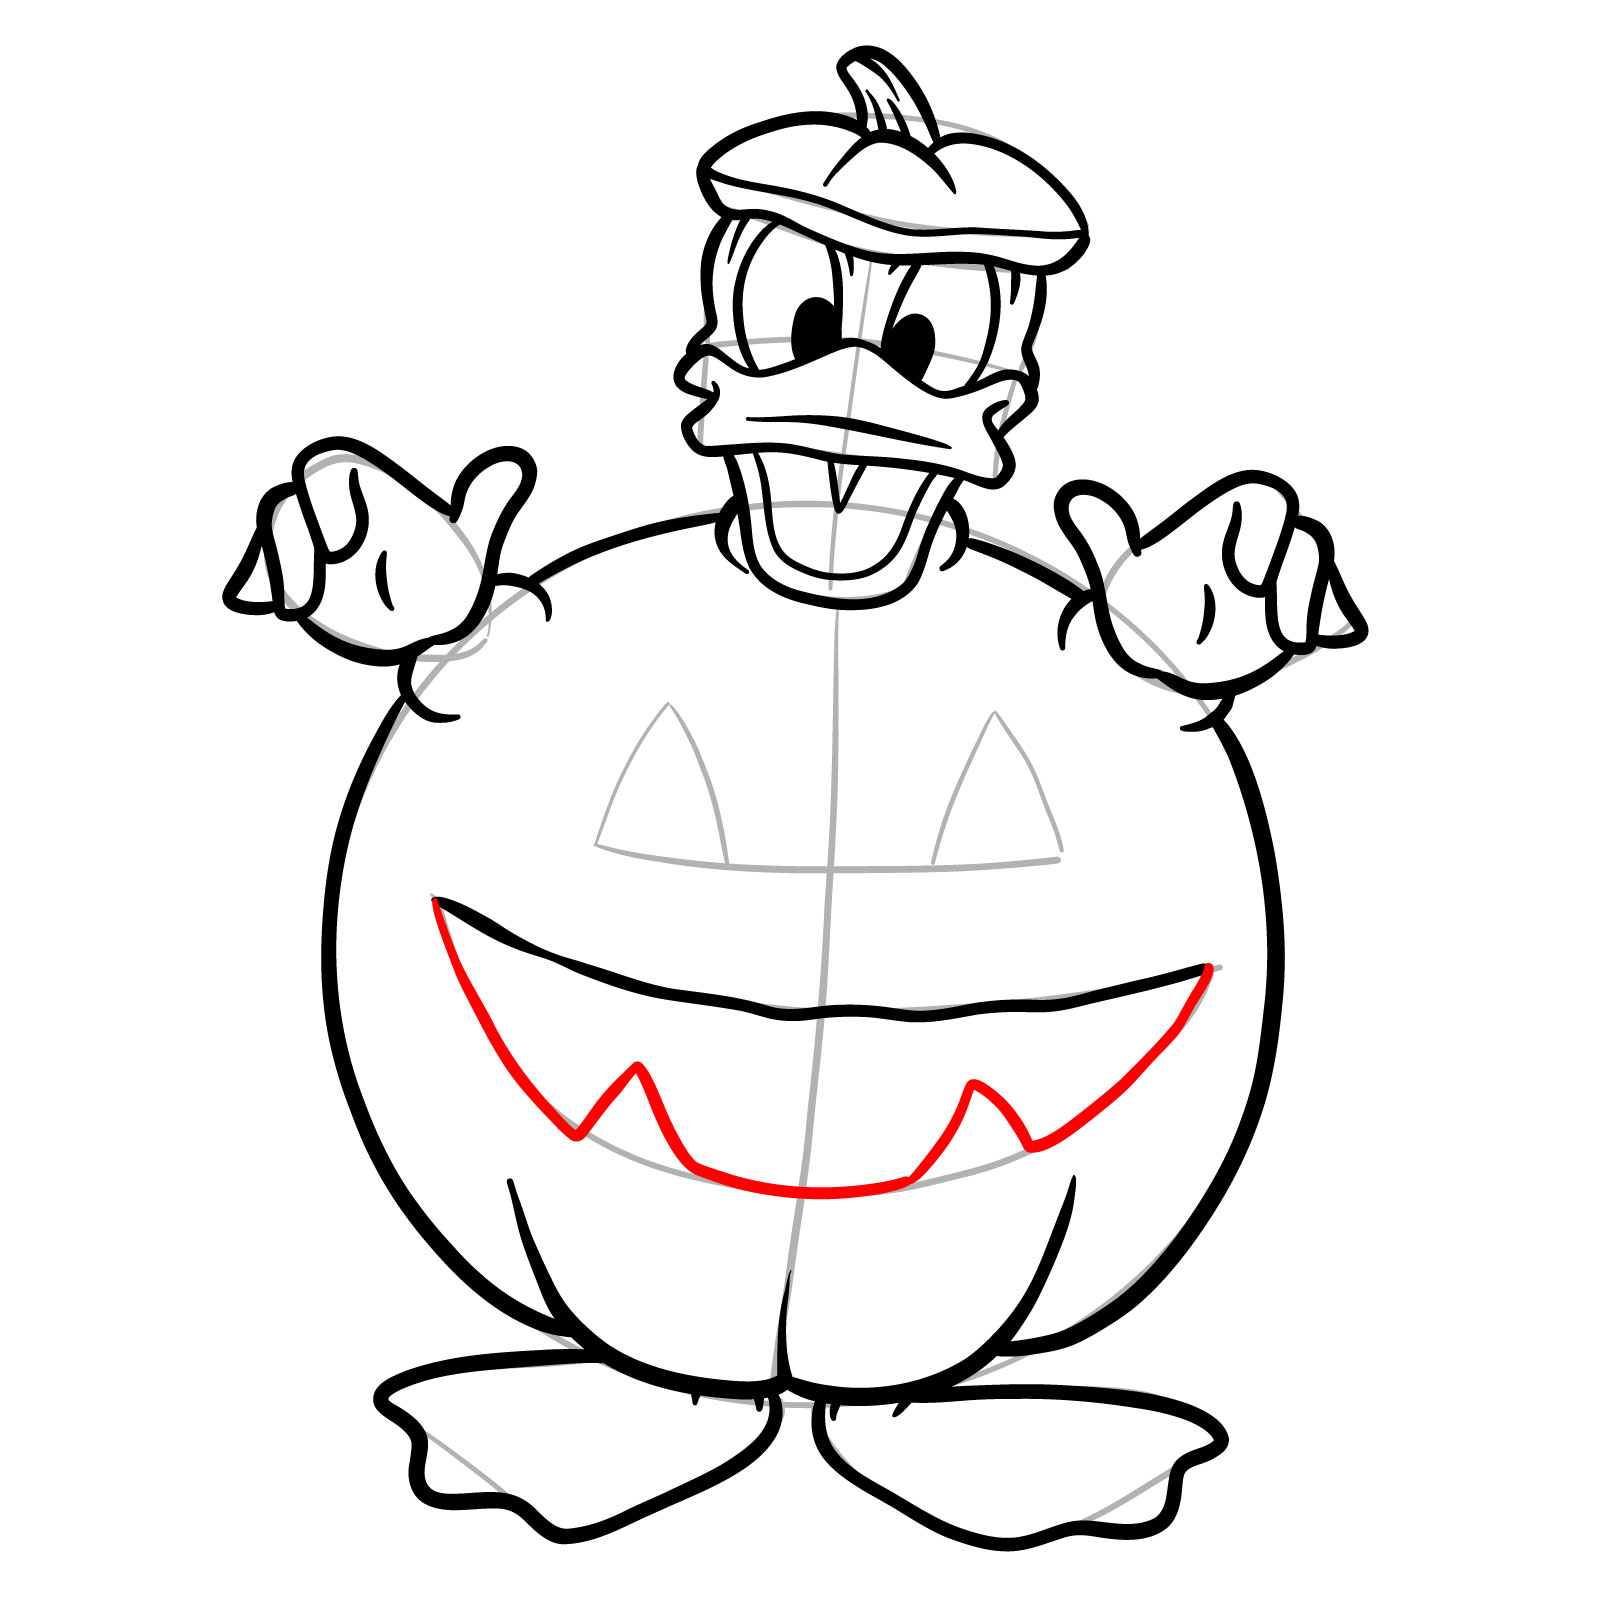 How to draw Halloween Donald Duck in a jack o'lantern - step 21